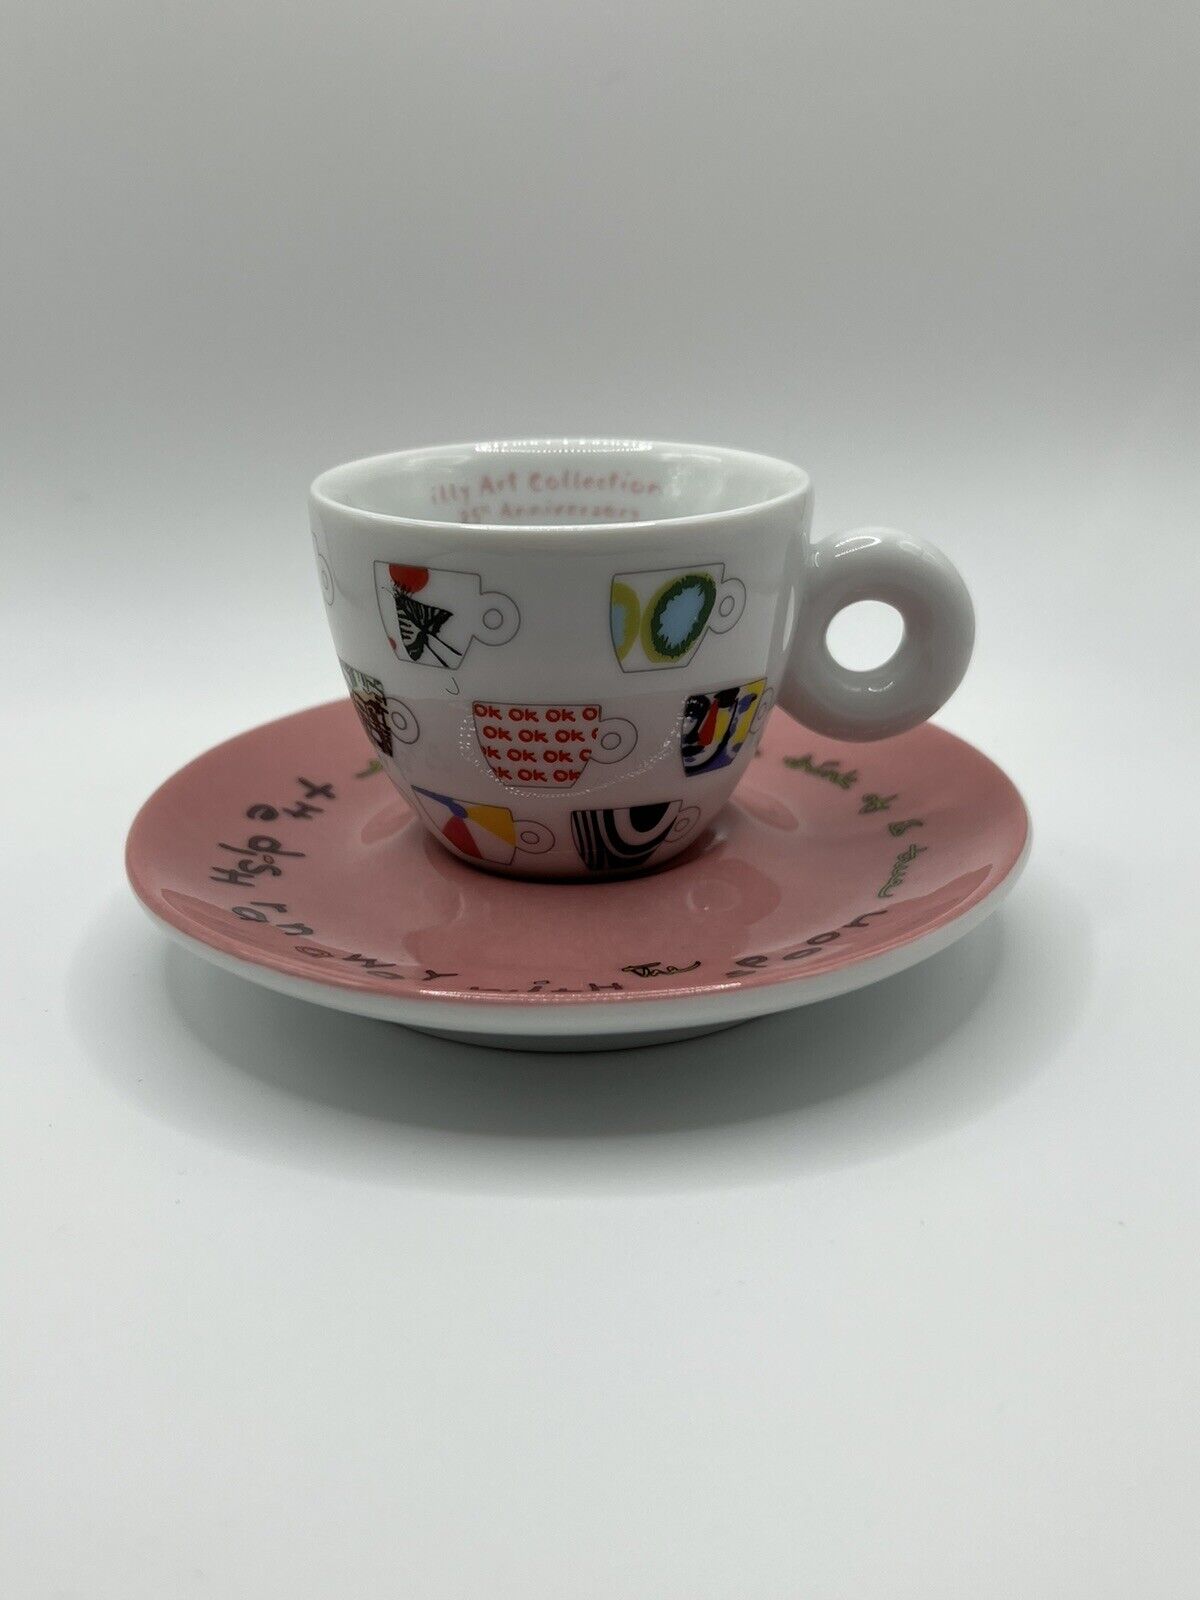 illy Art Collection 2017 Robert Wilson 25th Anniversary Pink Saucer & Cup Rare